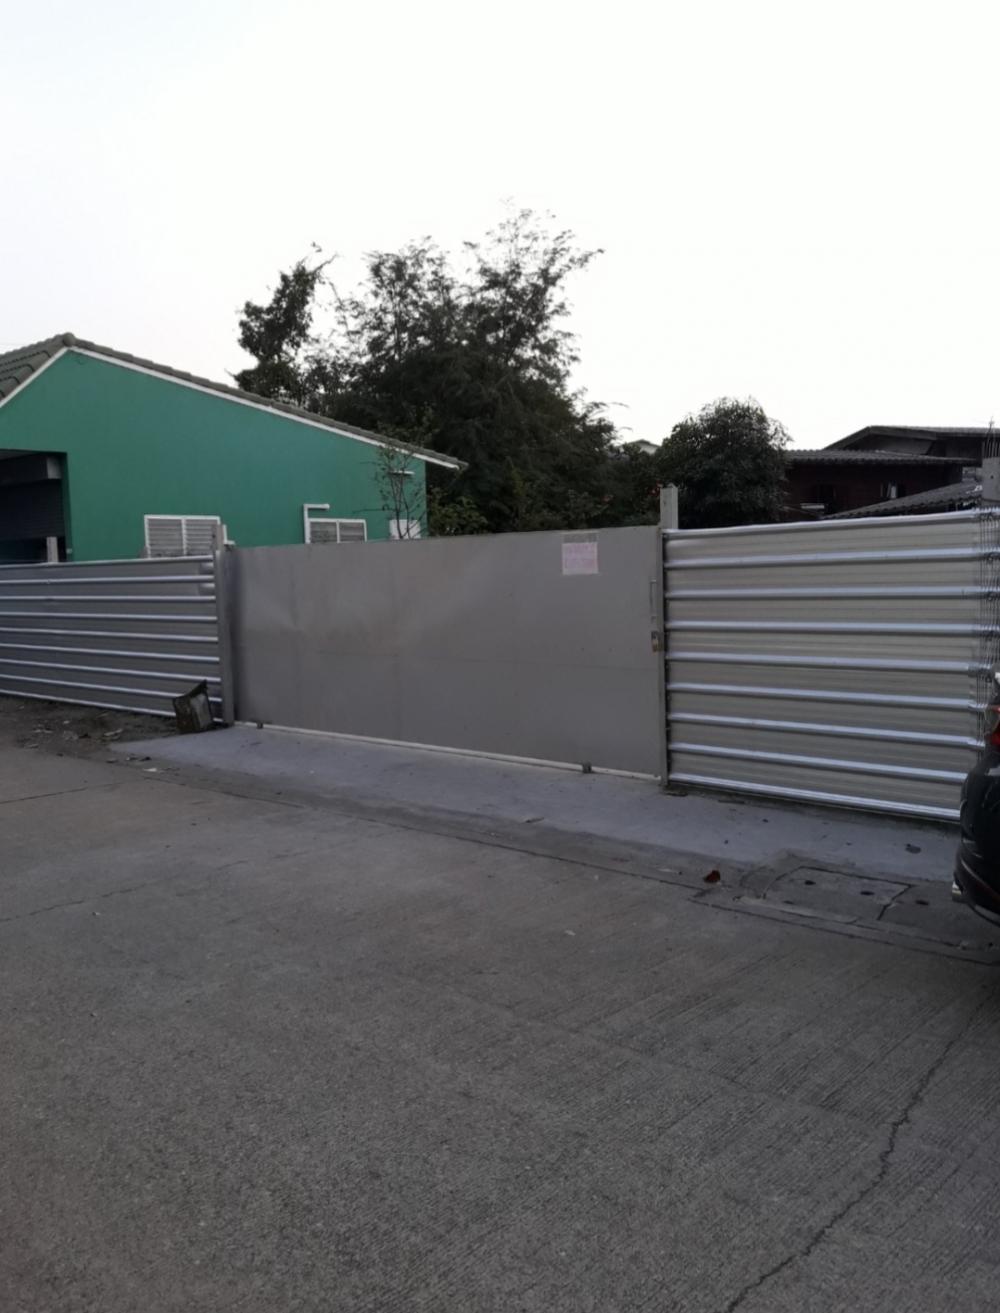 For RentLandBang kae, Phetkasem : 1. For sale/rent Soi Phetkasem 114, Bangkok 1. There is a warehouse, land 73 sq m., surrounded by a fence as in the picture, filled with high land, rent 17,000.-/month. If interested, call to talk. 2. Land 200 sq m., cement floor and surrounded by a high 